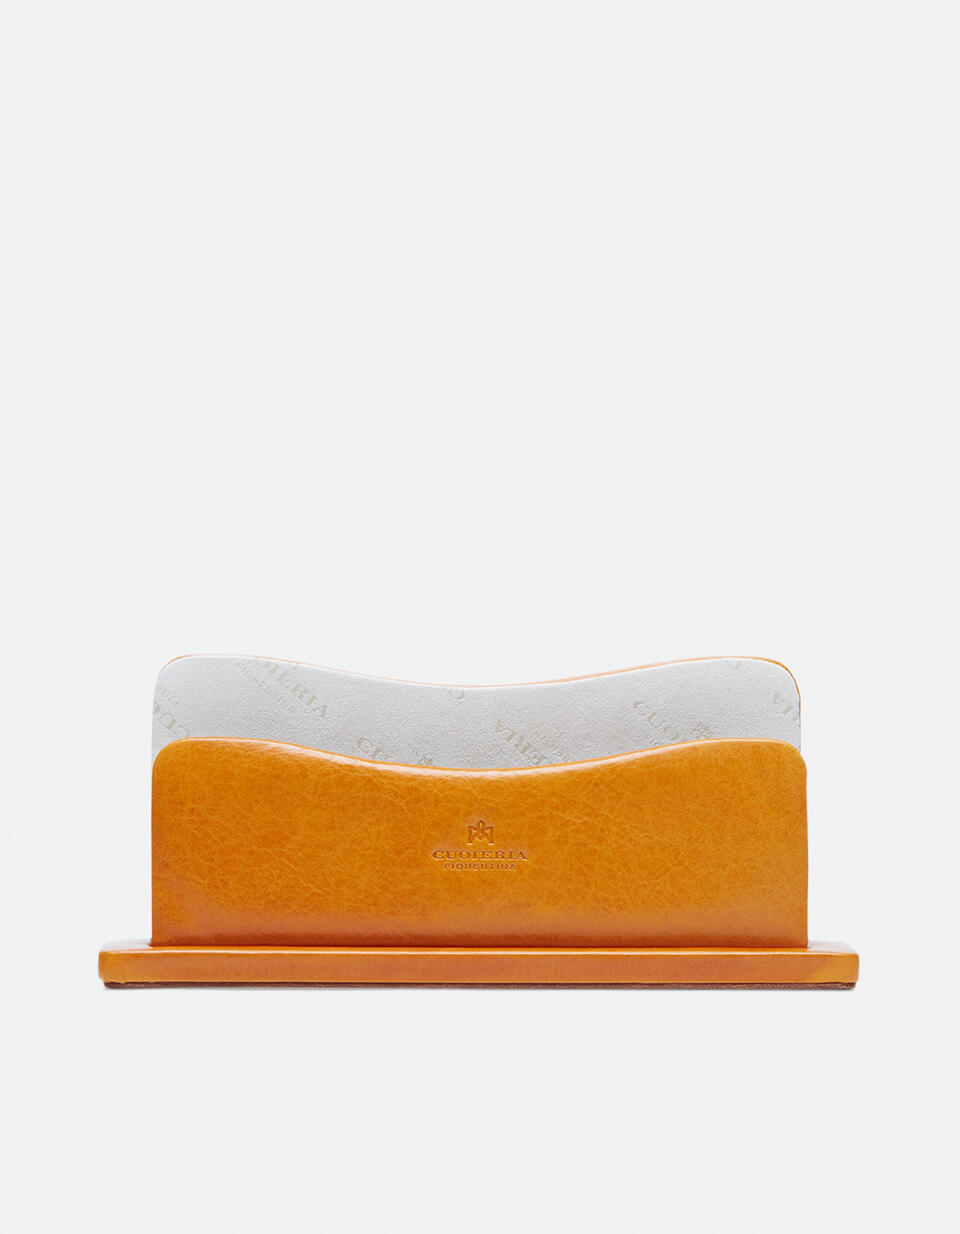 Vegetable tanned leather letter holder - Office | Accessories  - Office | AccessoriesCuoieria Fiorentina